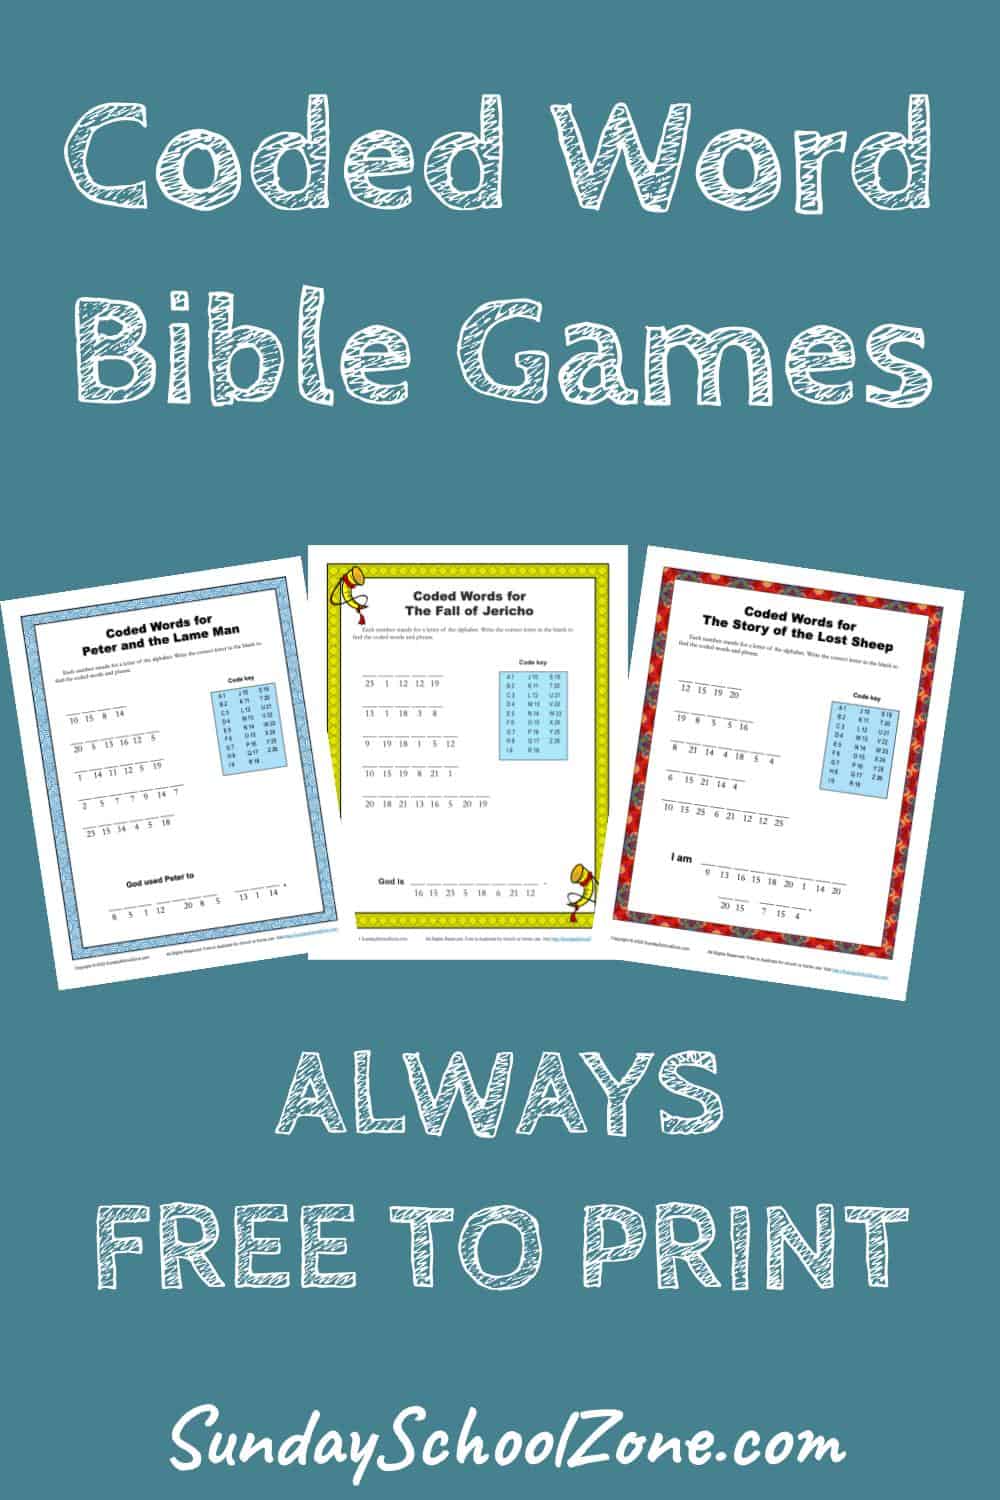 Coded Word Bible Activities for Children on Sunday School Zone